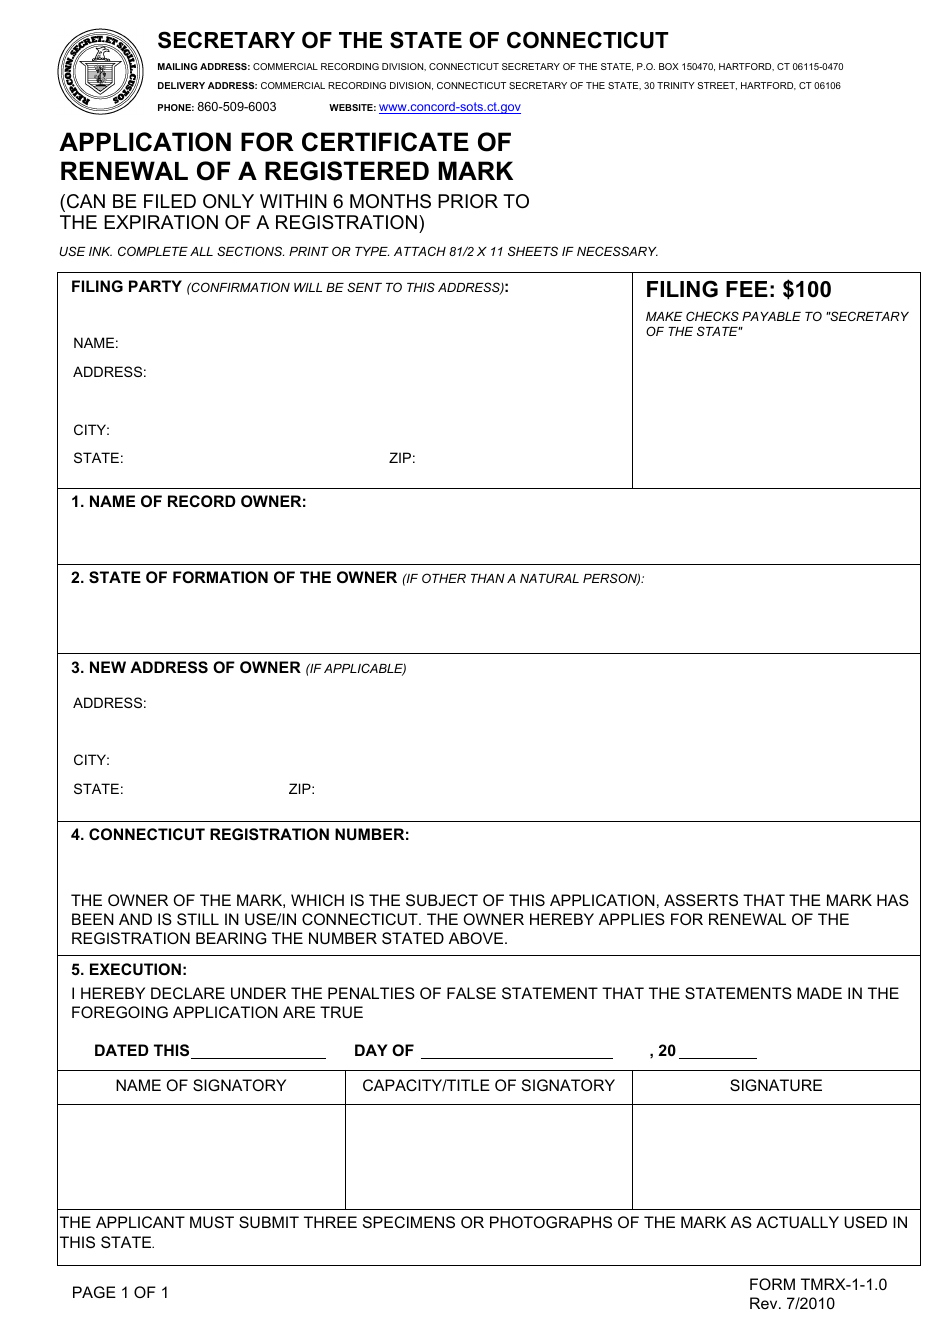 Form TMRX-1-1.0 Application for Certificate of Renewal of a Registered Mark - Connecticut, Page 1